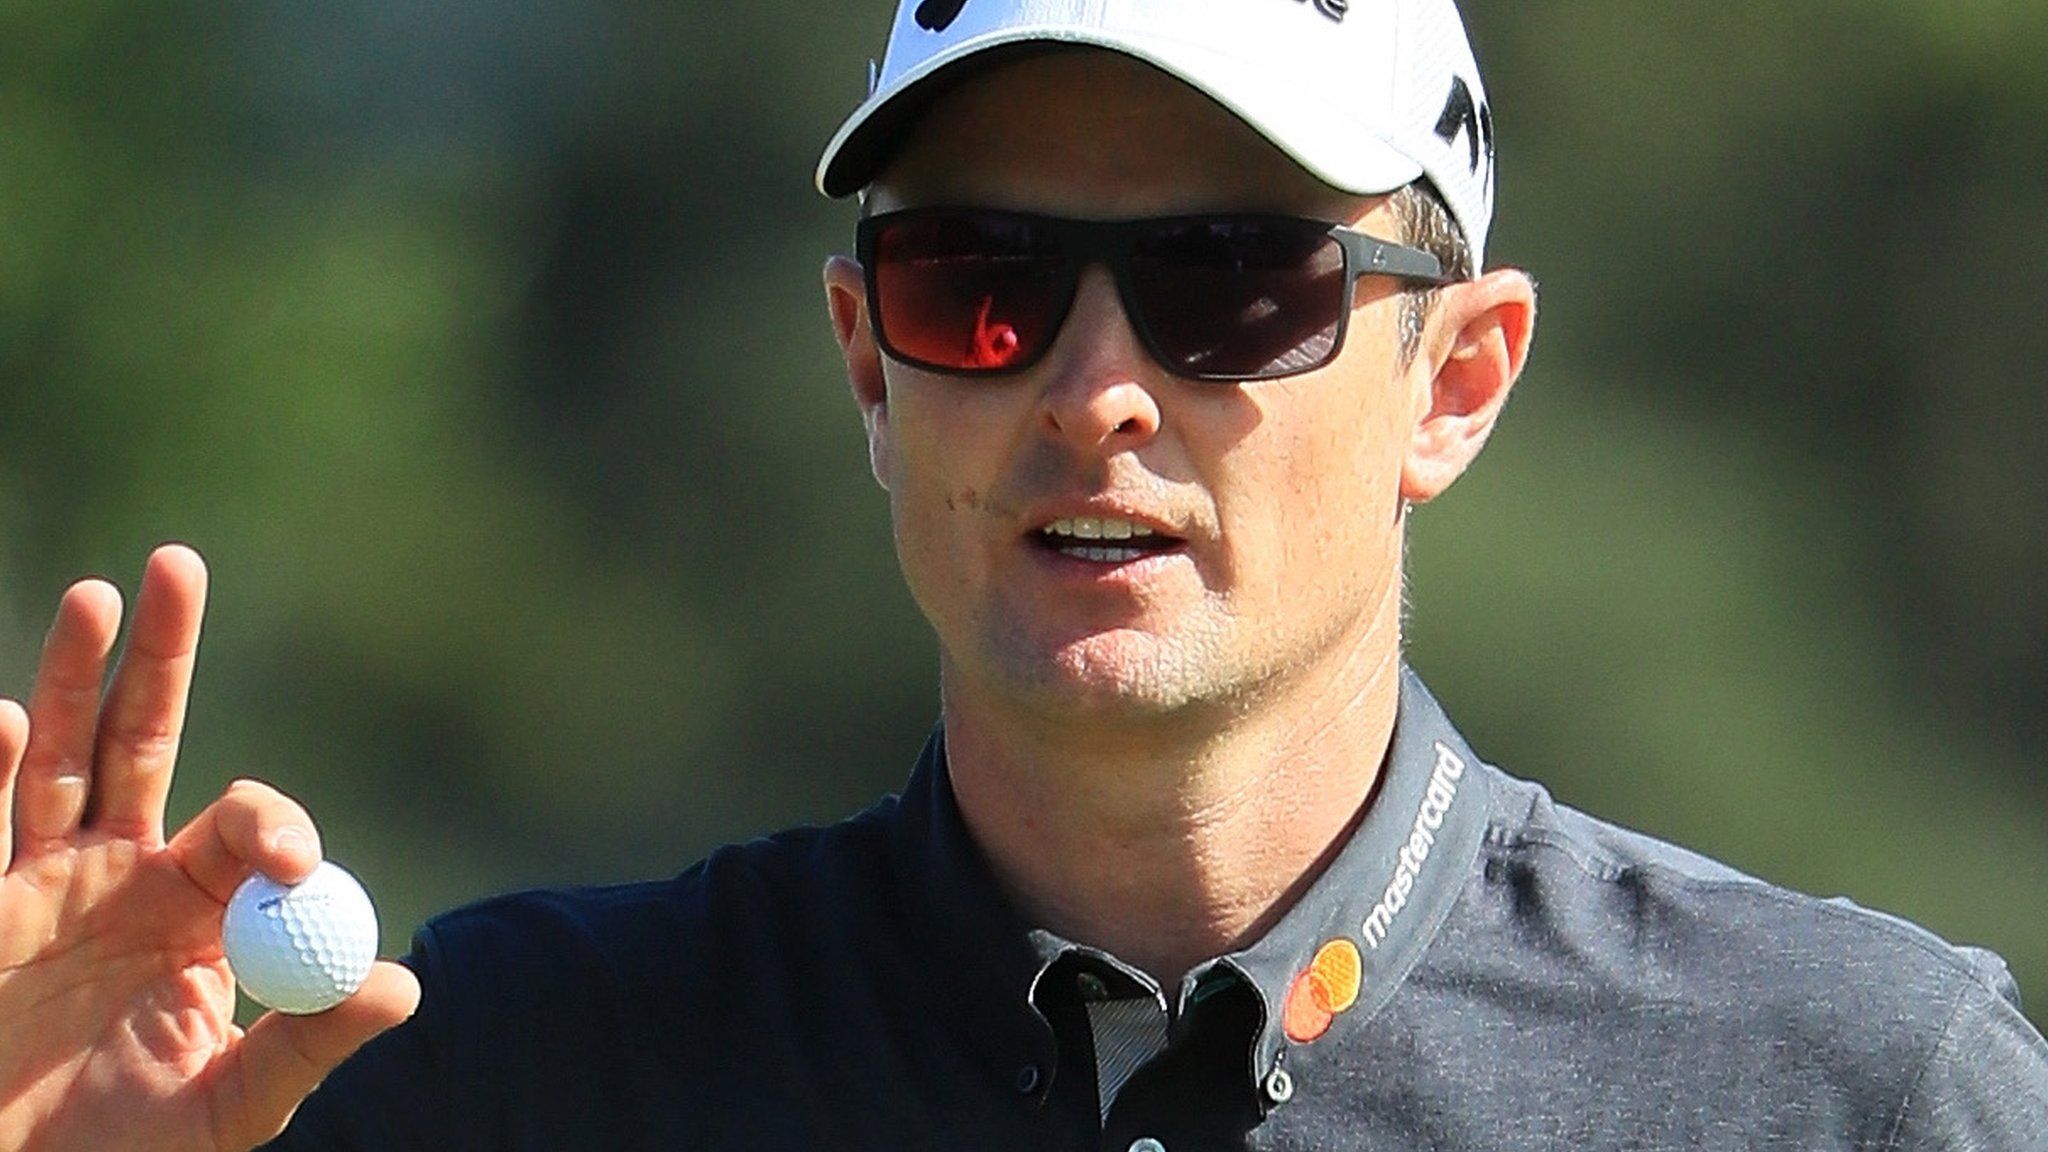 Justin Rose won the US Open in 2013 and narrowly missed out on a second major at Augusta earlier this month